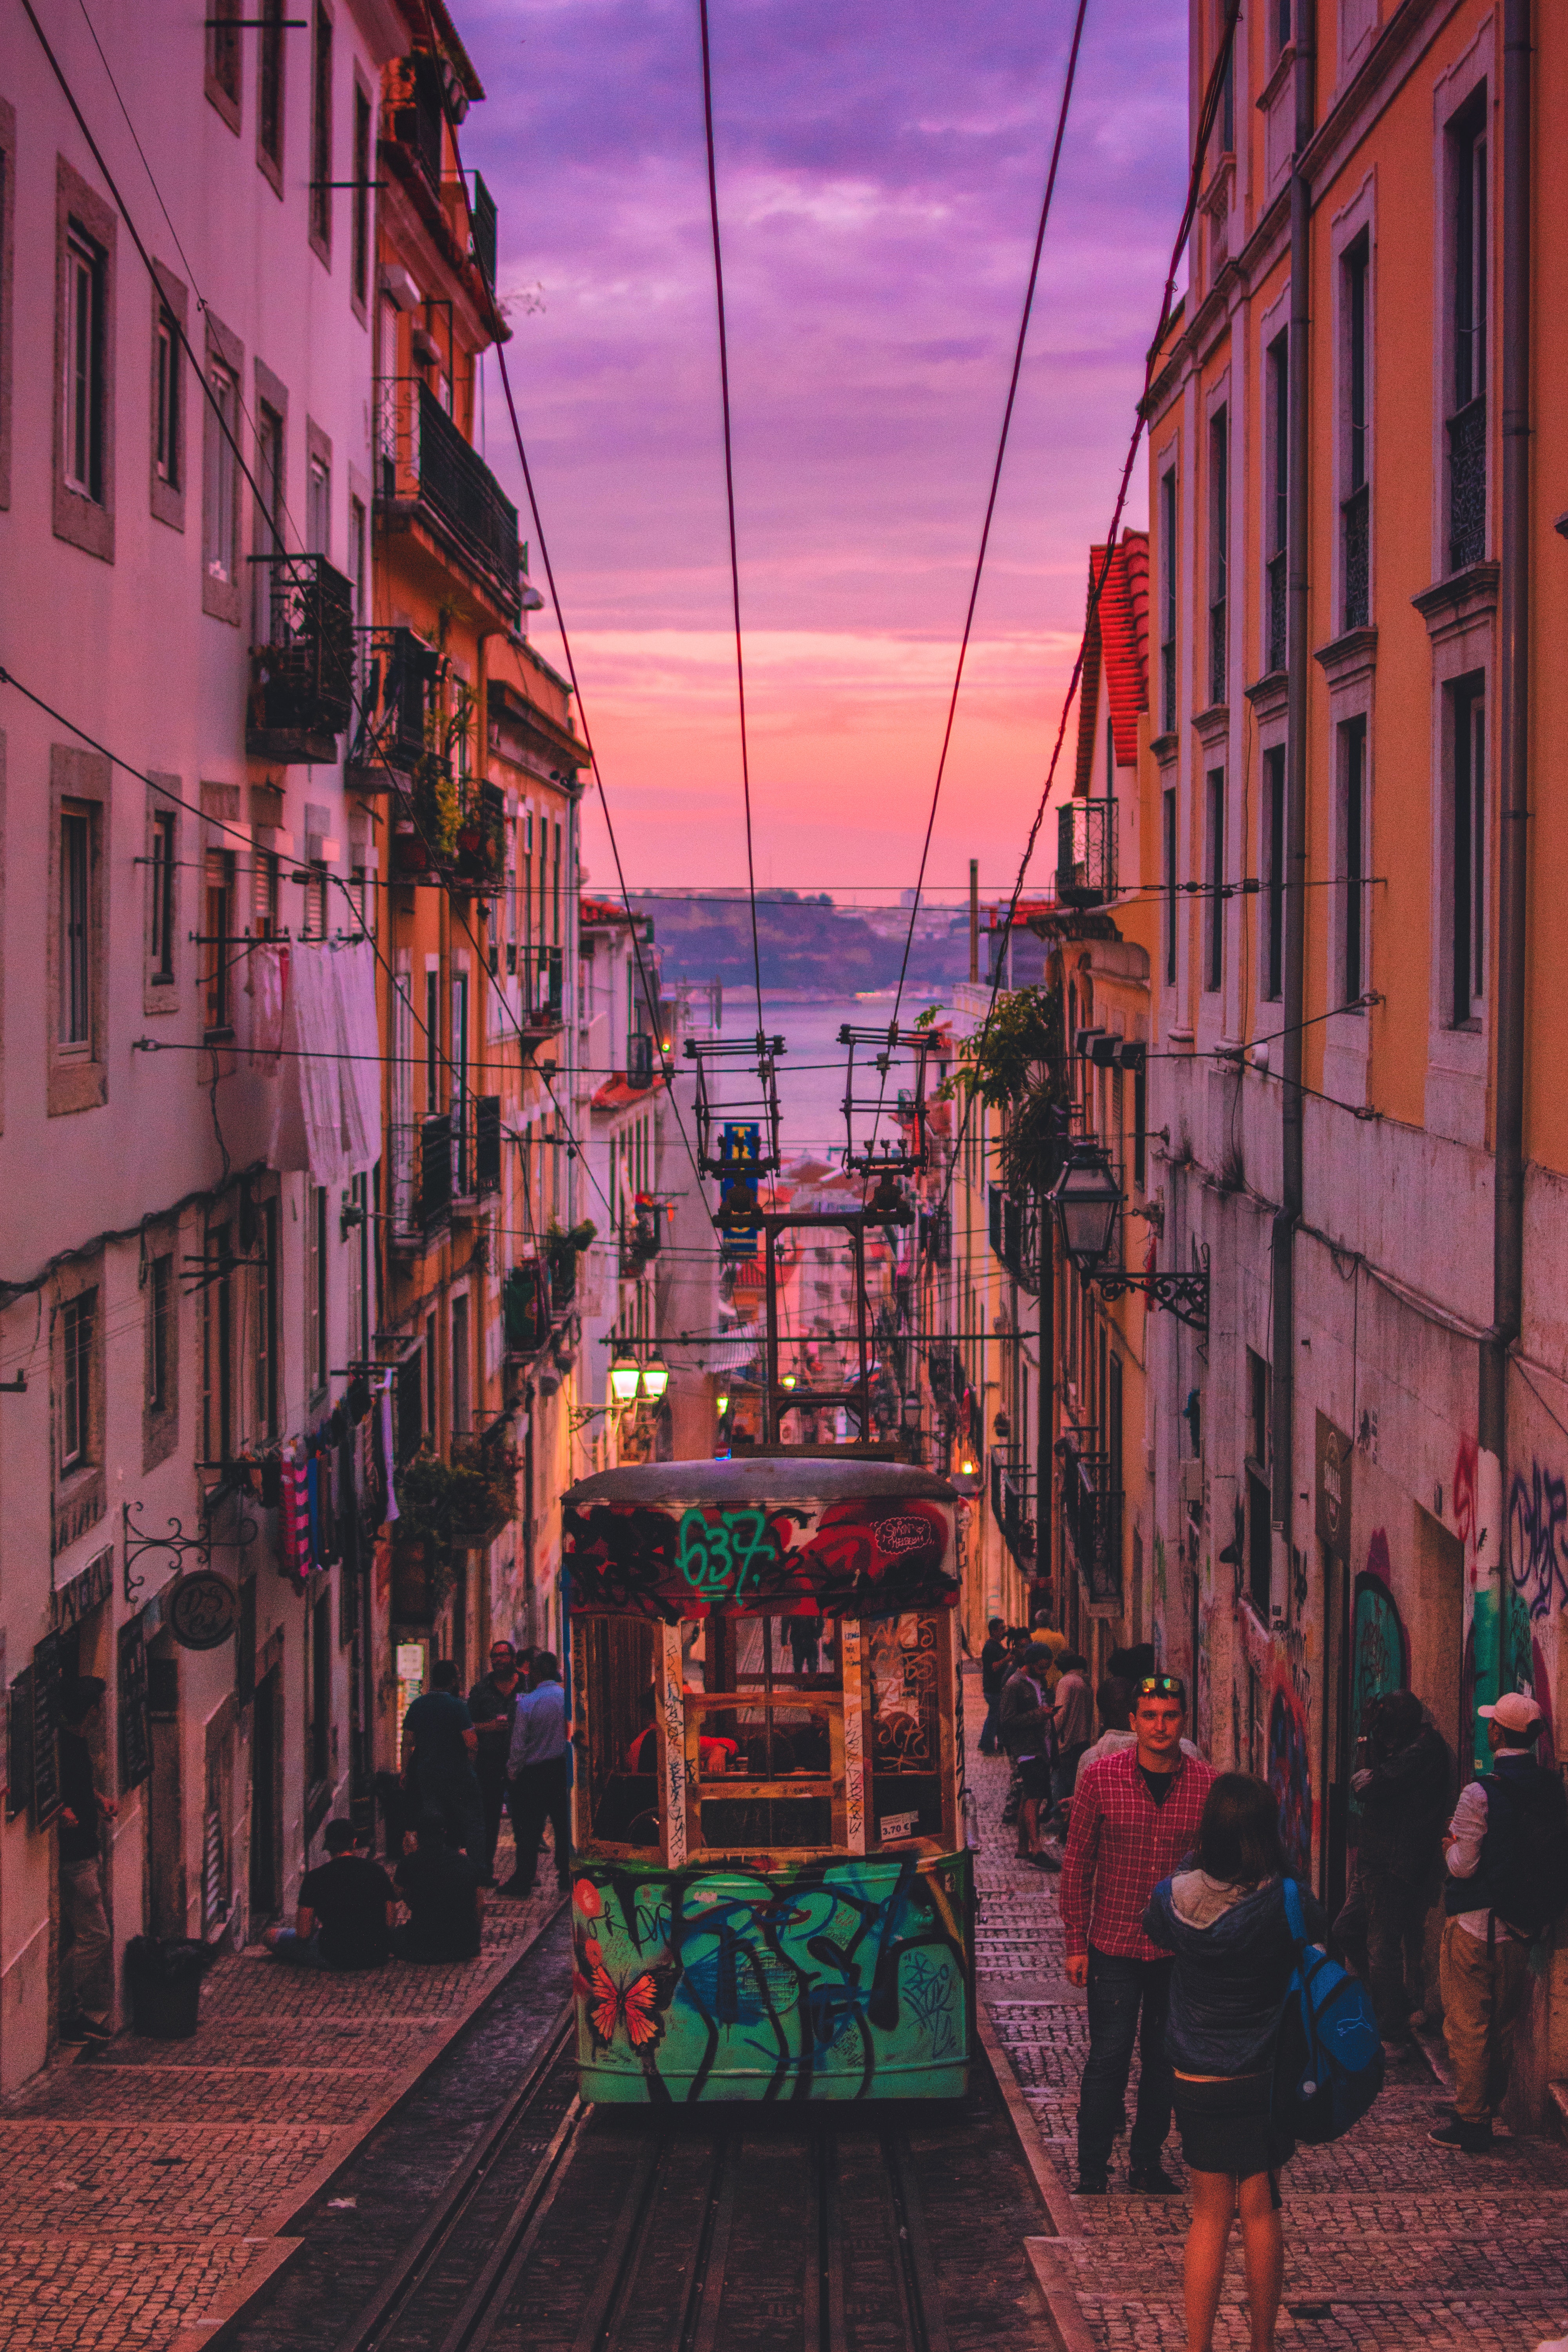 Portugal Wallpapers